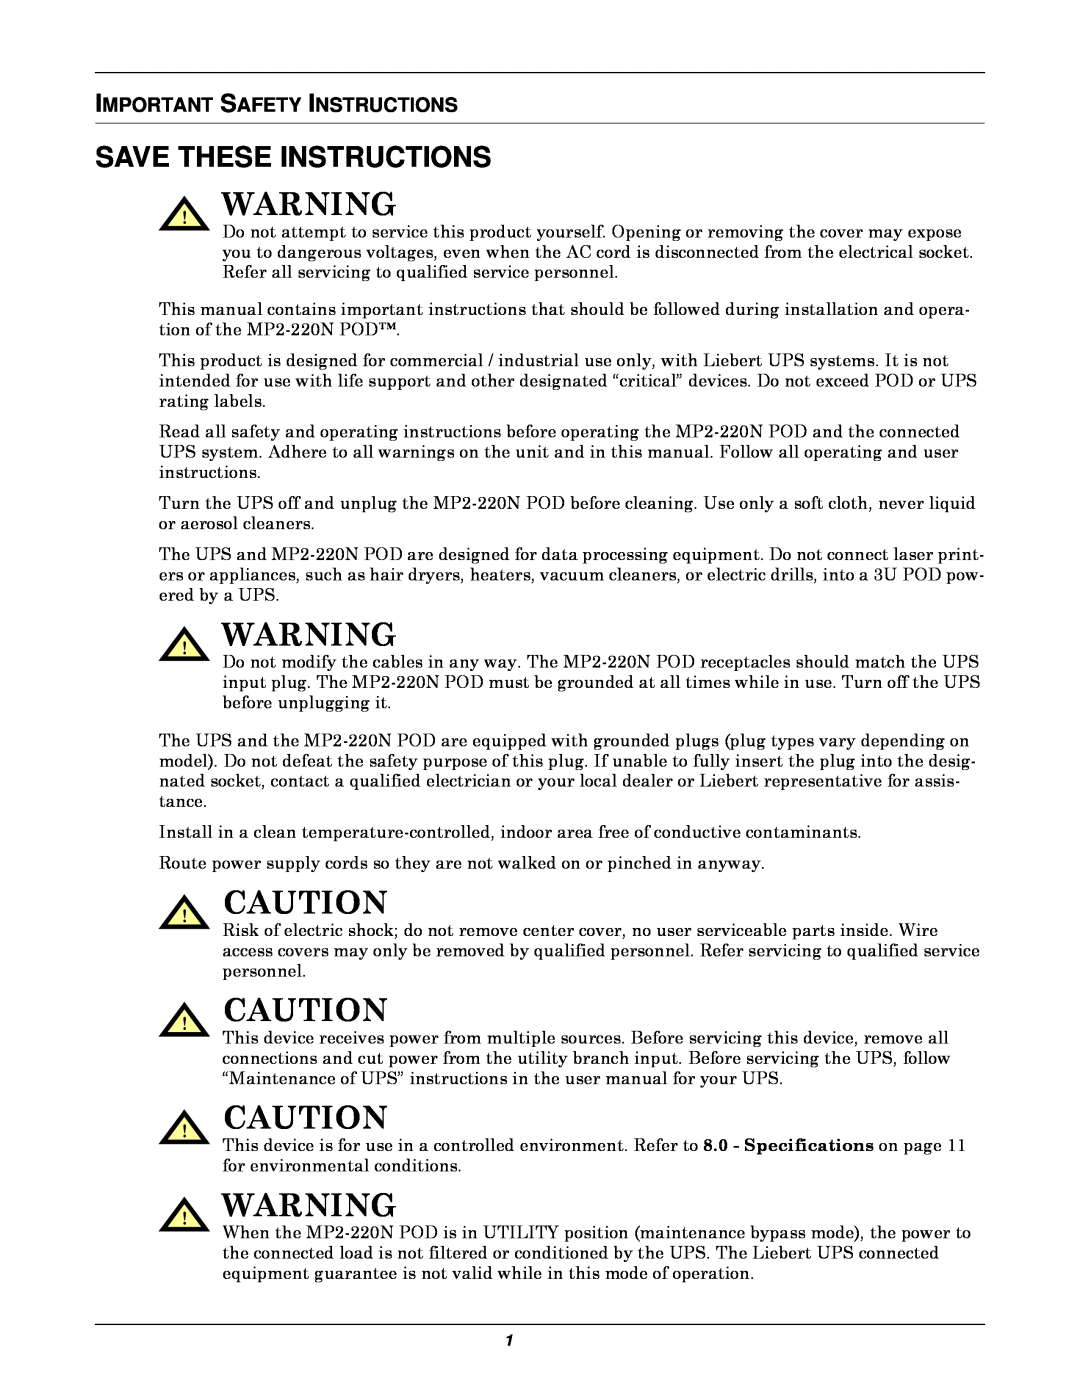 Emerson 3U MP2-220N user manual Important Safety Instructions, Save These Instructions 